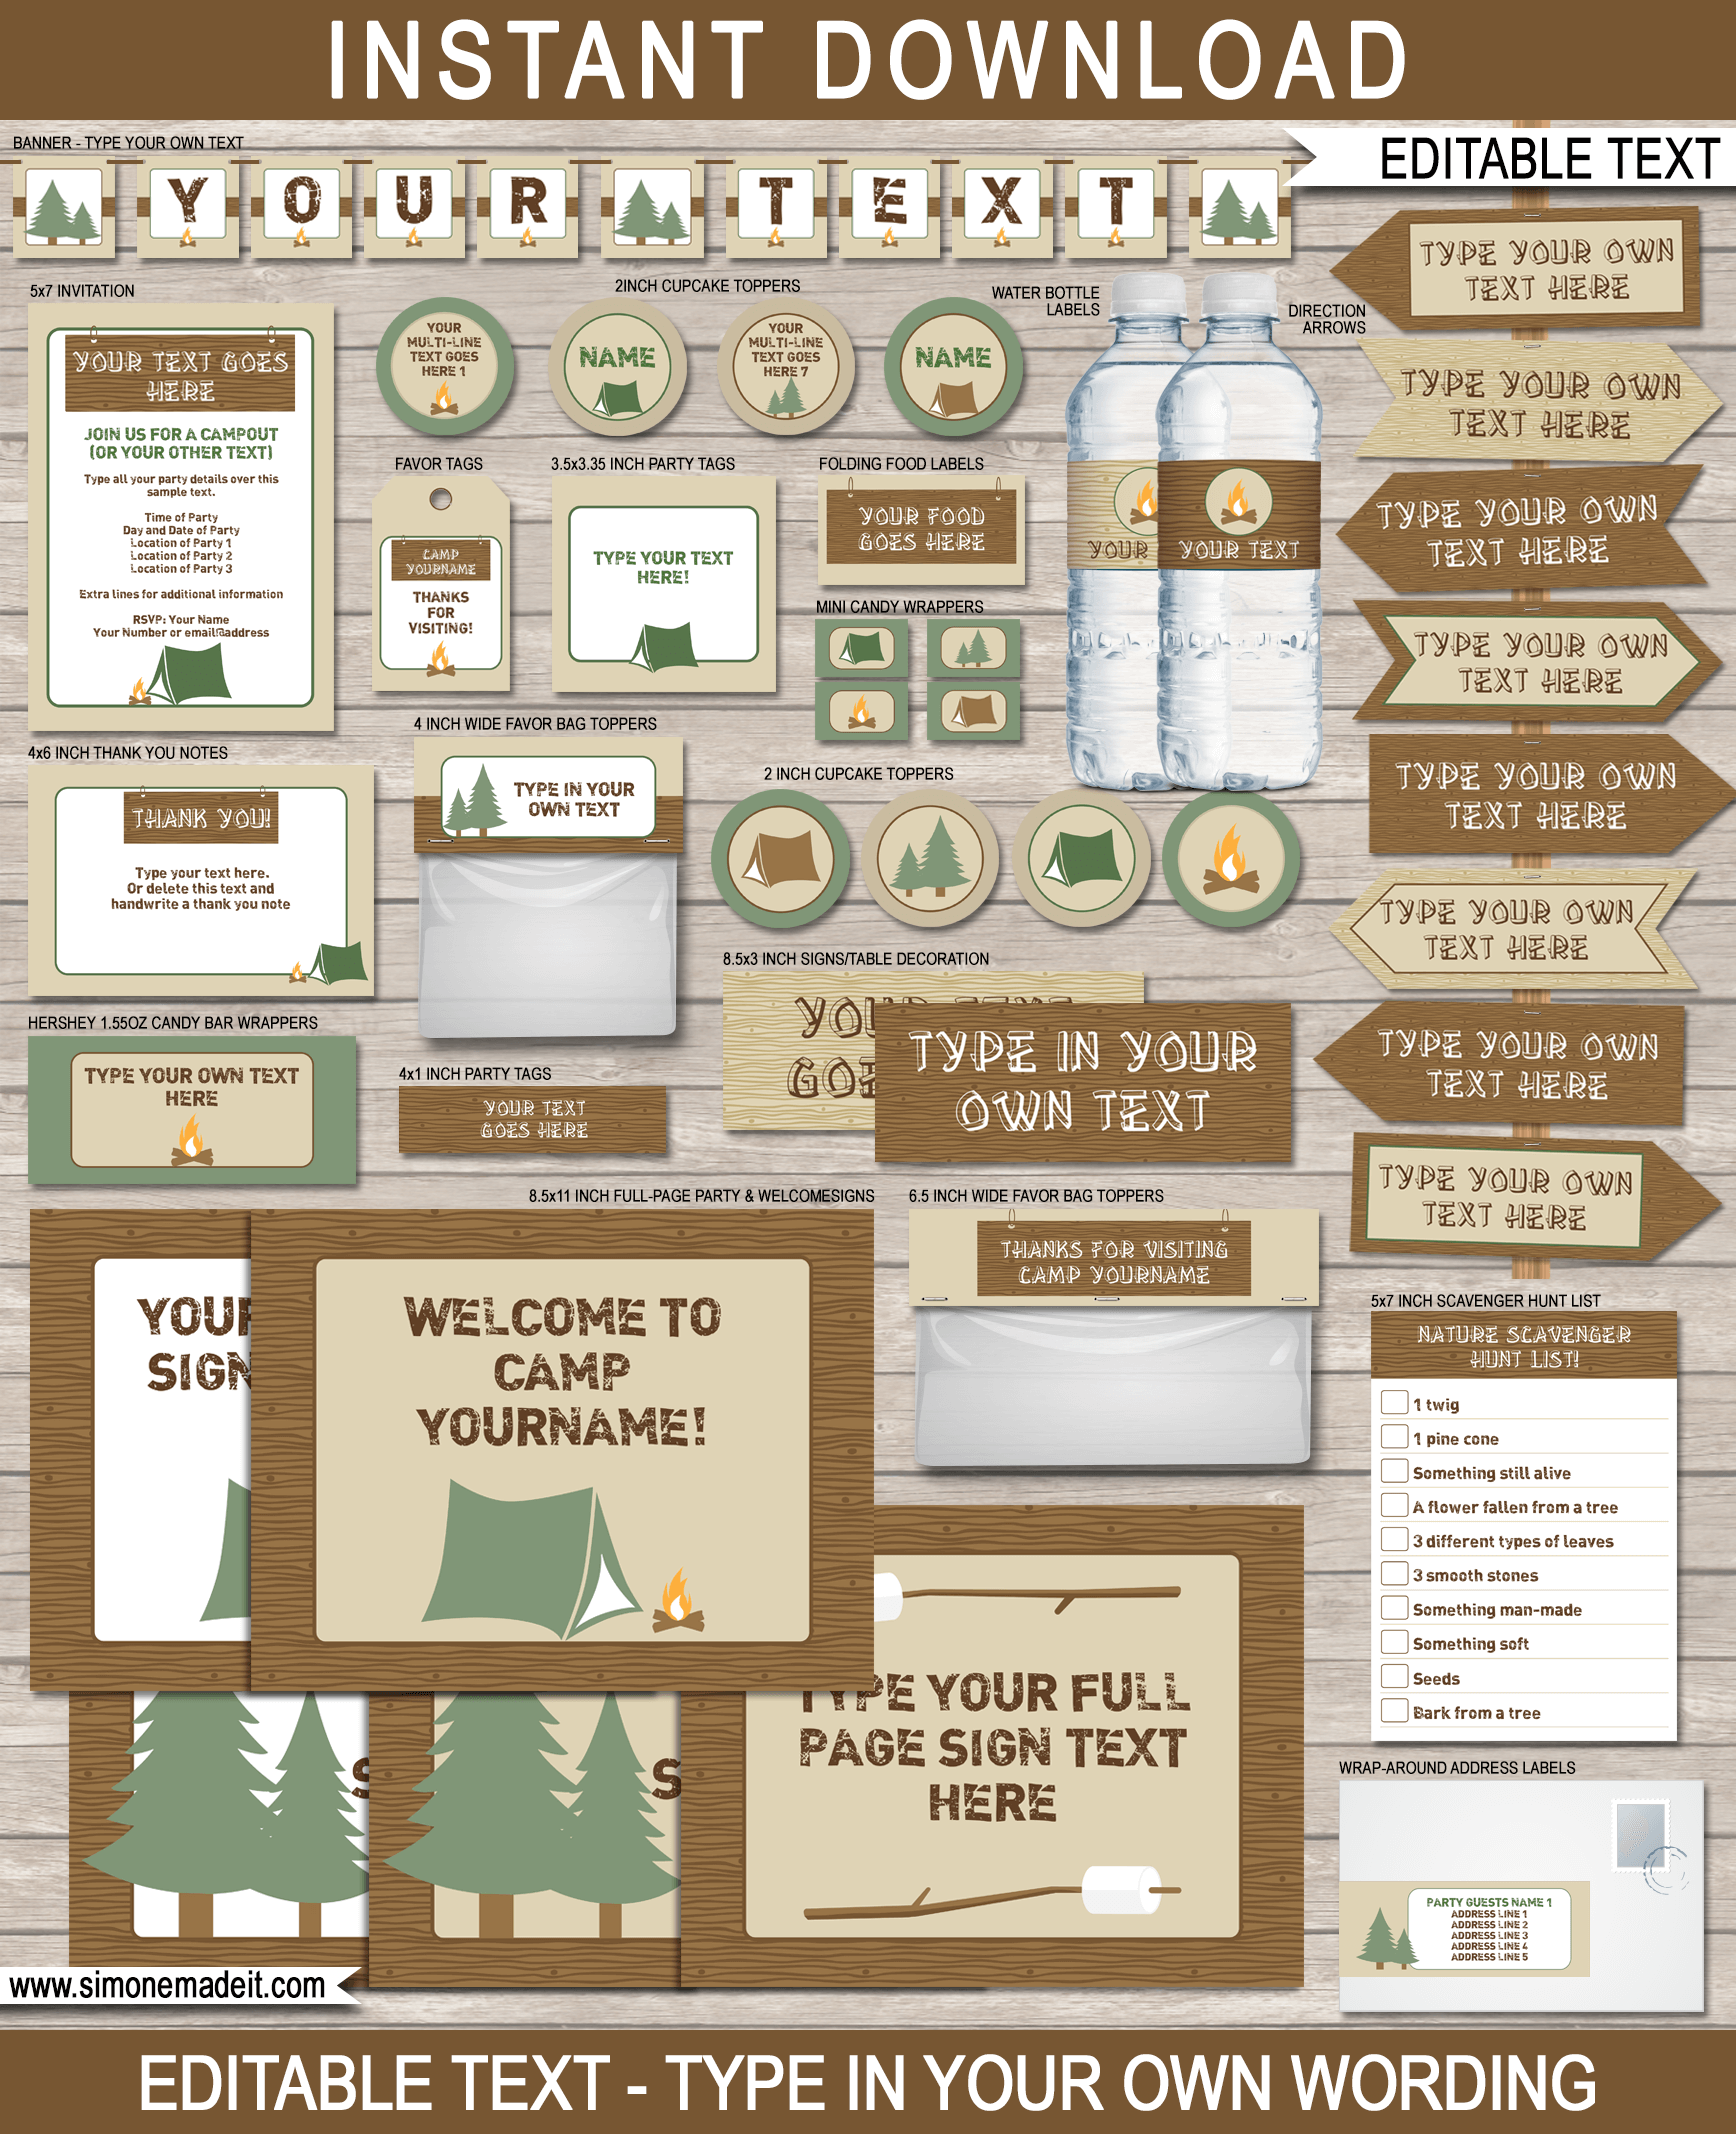 Camping Party Printables | Camping Birthday Party Theme | DIY Editable & Printable Templates | INSTANT DOWNLOAD $12.50 via simonemadeit.com